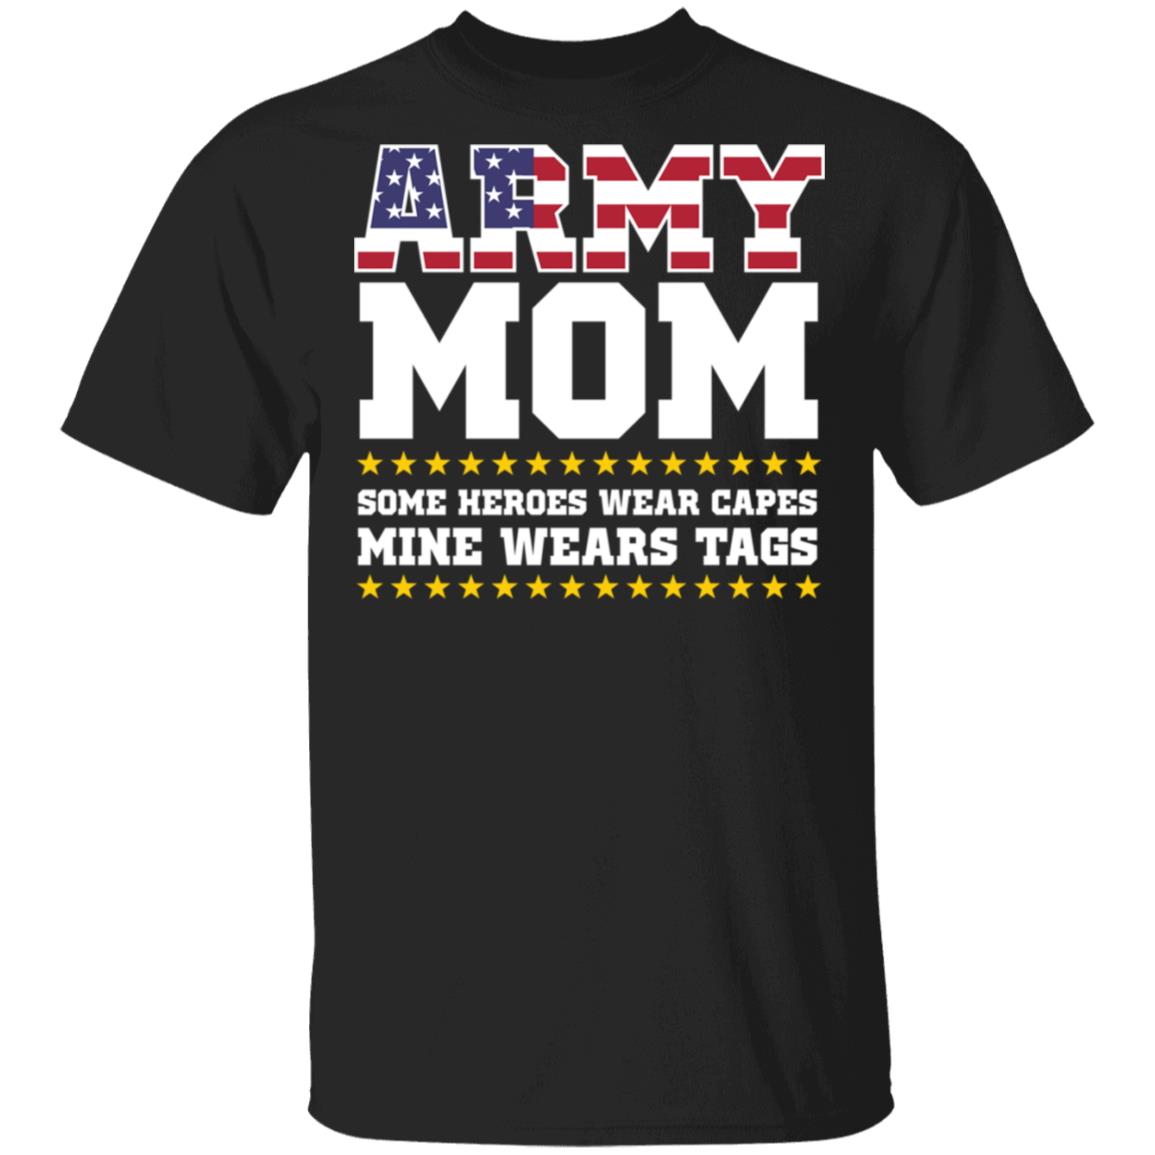 Army Mom Some Heroes Wear Capes Mine Wears Tags T-shirt Mother's Day Gift